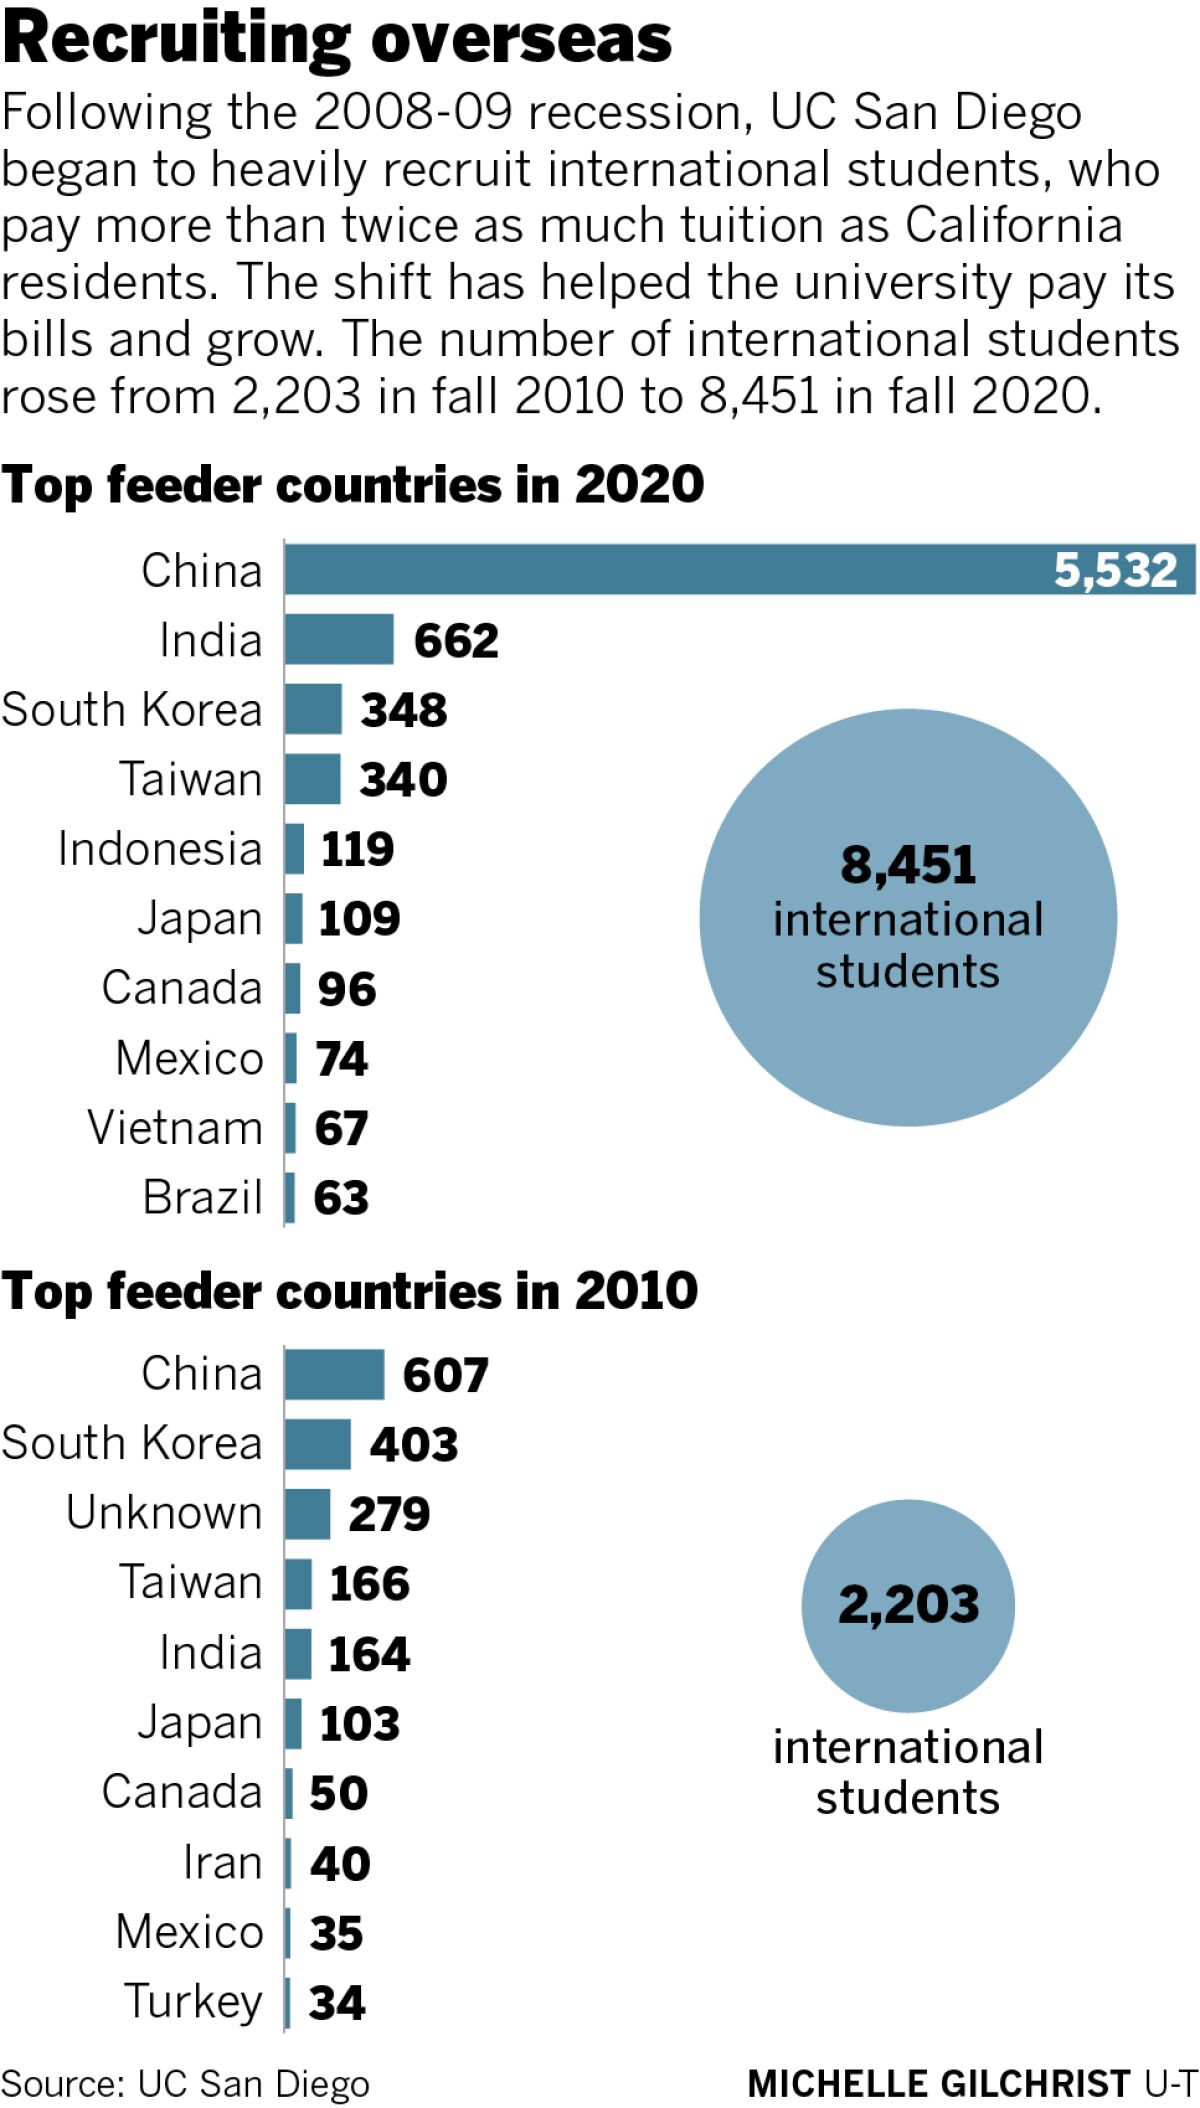 Recruiting overseas, UC San Diego international students by top feeder countries in 2010 and 2020